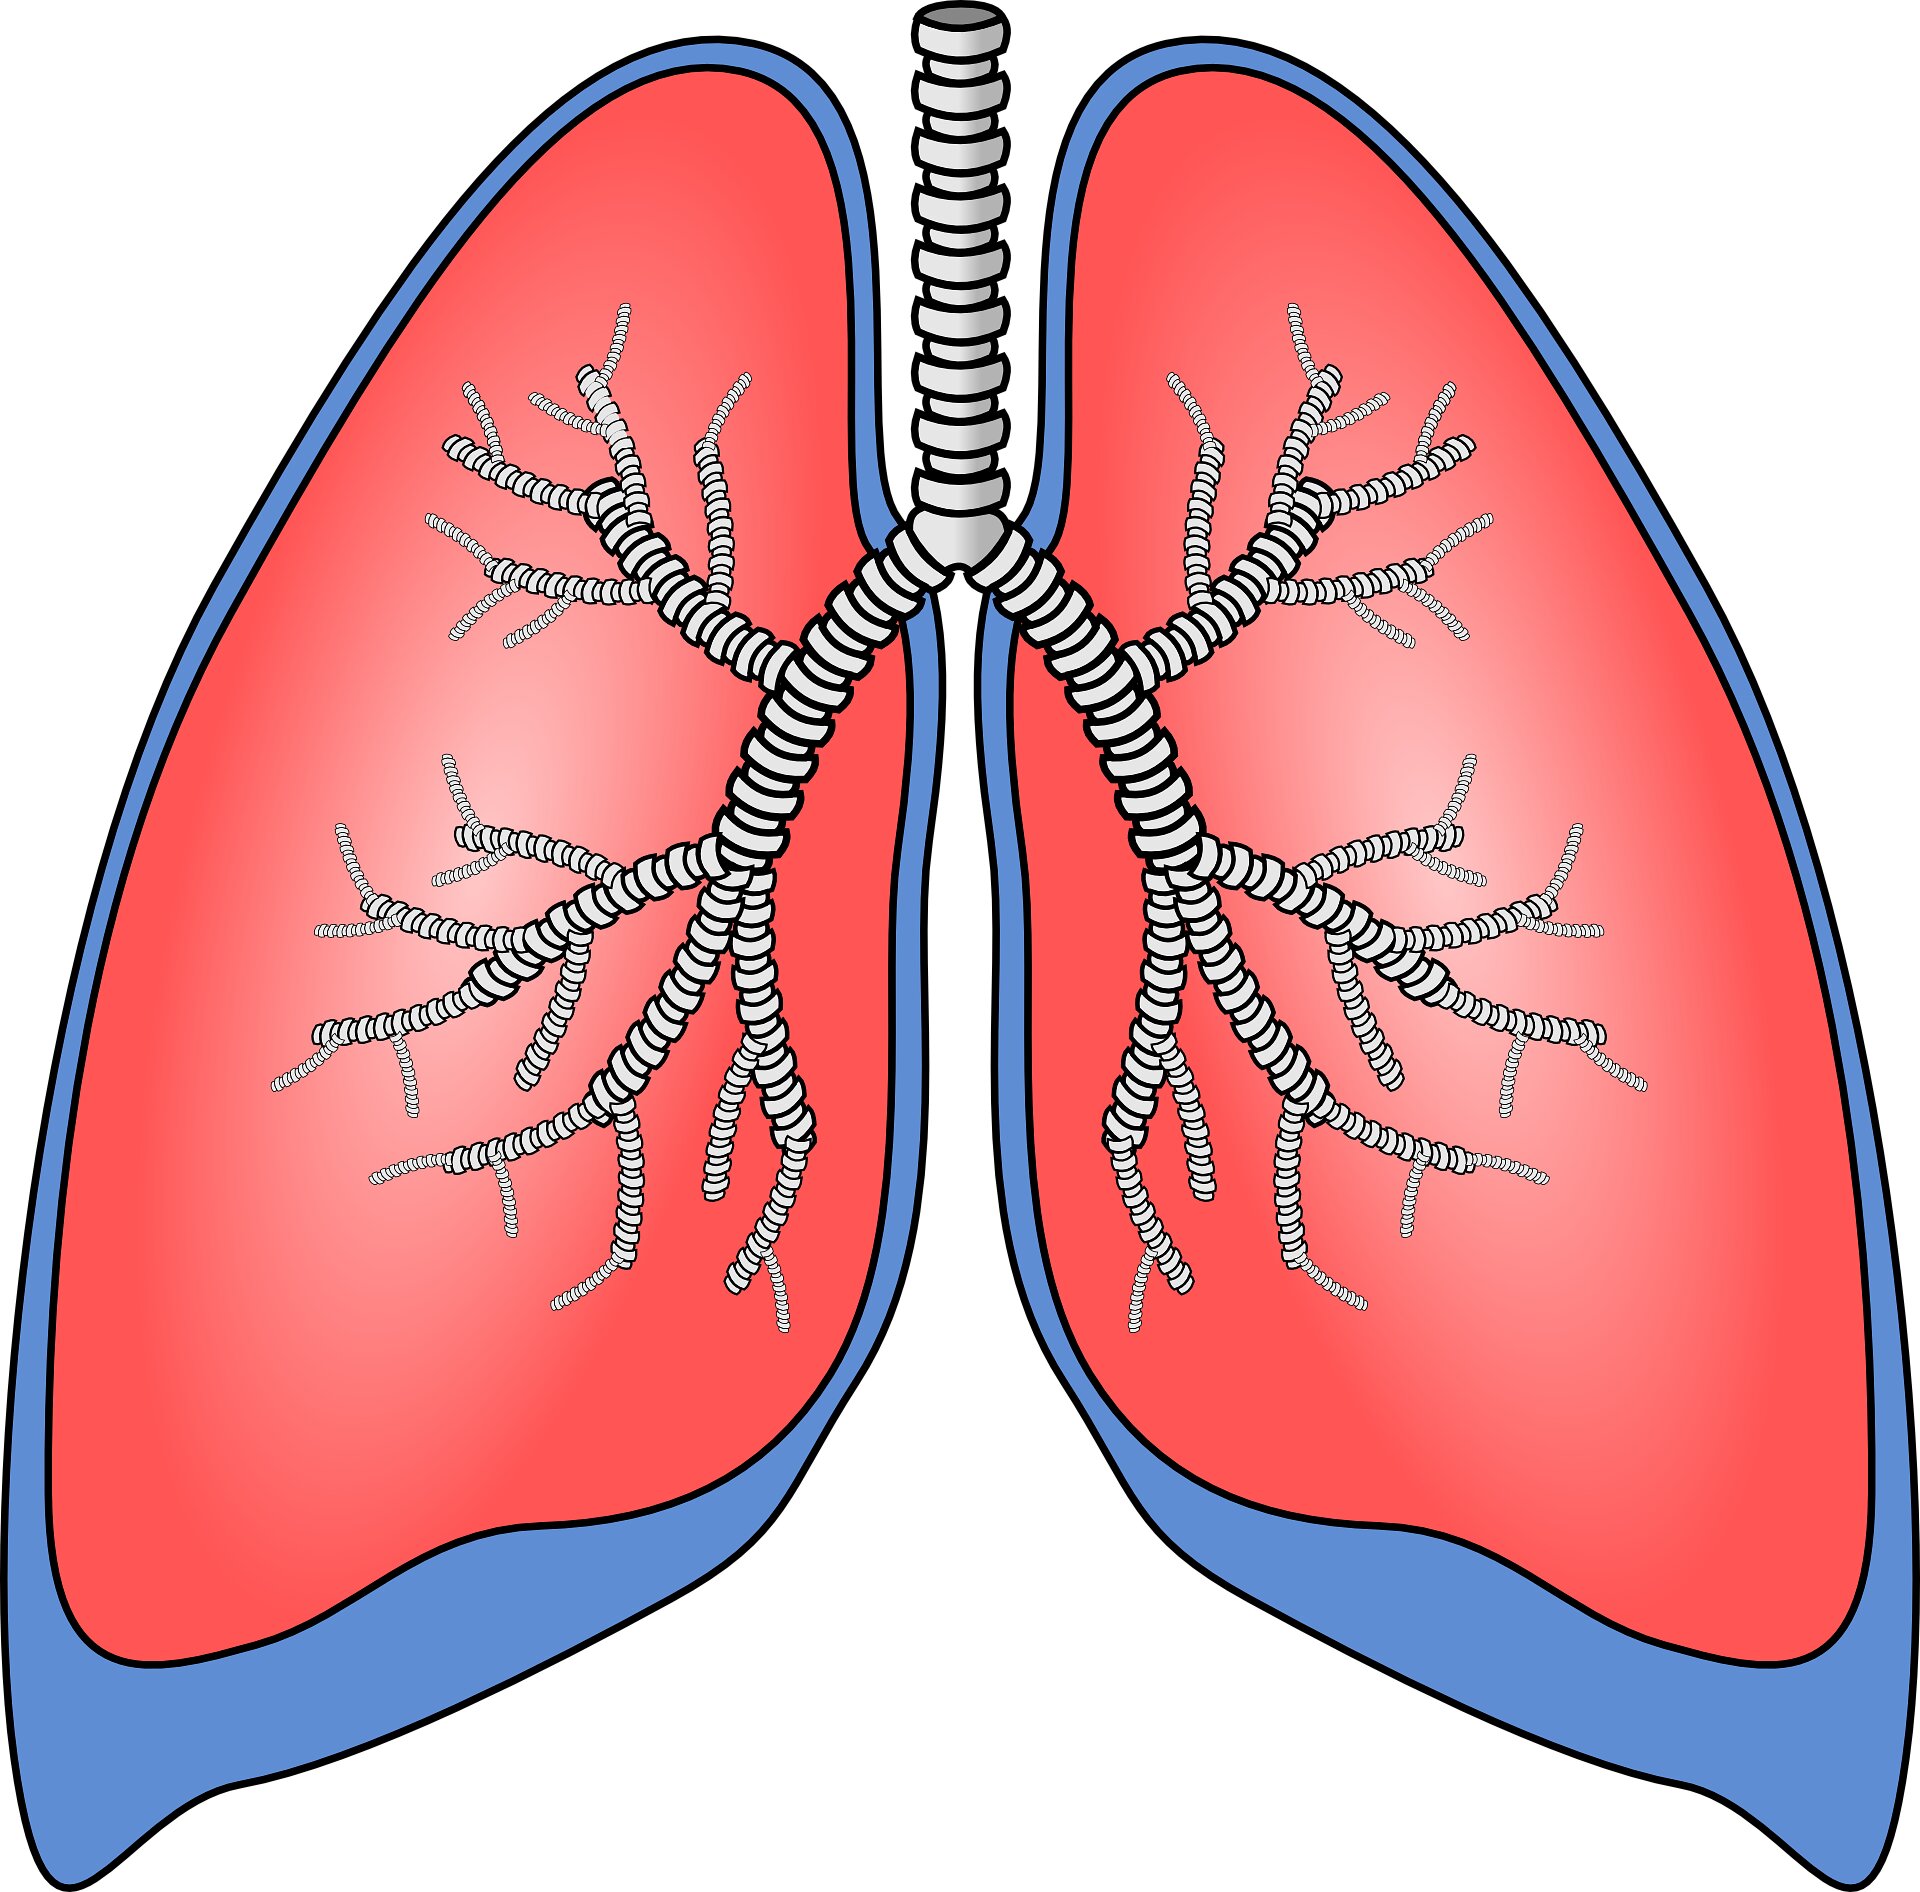 New study supports saving more lung tissue in lung cancer surgeries